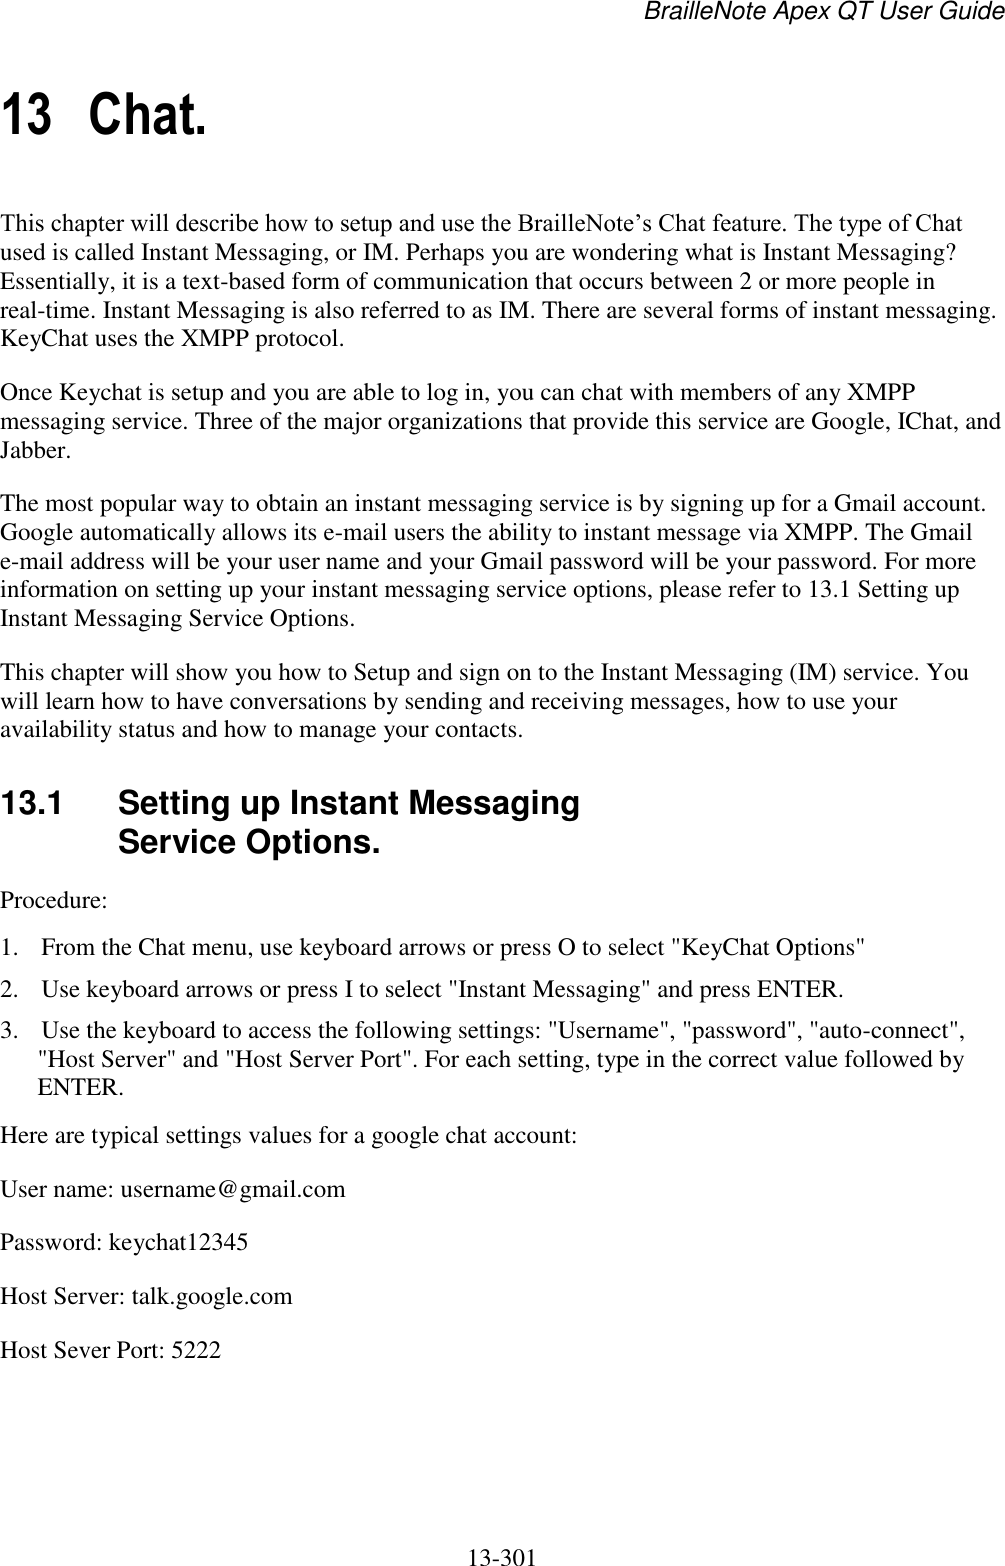 BrailleNote Apex QT User Guide  13-301   13 Chat. This chapter will describe how to setup and use the BrailleNote‟s Chat feature. The type of Chat used is called Instant Messaging, or IM. Perhaps you are wondering what is Instant Messaging? Essentially, it is a text-based form of communication that occurs between 2 or more people in real-time. Instant Messaging is also referred to as IM. There are several forms of instant messaging. KeyChat uses the XMPP protocol.  Once Keychat is setup and you are able to log in, you can chat with members of any XMPP messaging service. Three of the major organizations that provide this service are Google, IChat, and Jabber. The most popular way to obtain an instant messaging service is by signing up for a Gmail account. Google automatically allows its e-mail users the ability to instant message via XMPP. The Gmail e-mail address will be your user name and your Gmail password will be your password. For more information on setting up your instant messaging service options, please refer to 13.1 Setting up Instant Messaging Service Options. This chapter will show you how to Setup and sign on to the Instant Messaging (IM) service. You will learn how to have conversations by sending and receiving messages, how to use your availability status and how to manage your contacts.  13.1  Setting up Instant Messaging Service Options. Procedure:  1. From the Chat menu, use keyboard arrows or press O to select &quot;KeyChat Options&quot; 2. Use keyboard arrows or press I to select &quot;Instant Messaging&quot; and press ENTER.  3. Use the keyboard to access the following settings: &quot;Username&quot;, &quot;password&quot;, &quot;auto-connect&quot;, &quot;Host Server&quot; and &quot;Host Server Port&quot;. For each setting, type in the correct value followed by ENTER.  Here are typical settings values for a google chat account:  User name: username@gmail.com Password: keychat12345 Host Server: talk.google.com Host Sever Port: 5222  